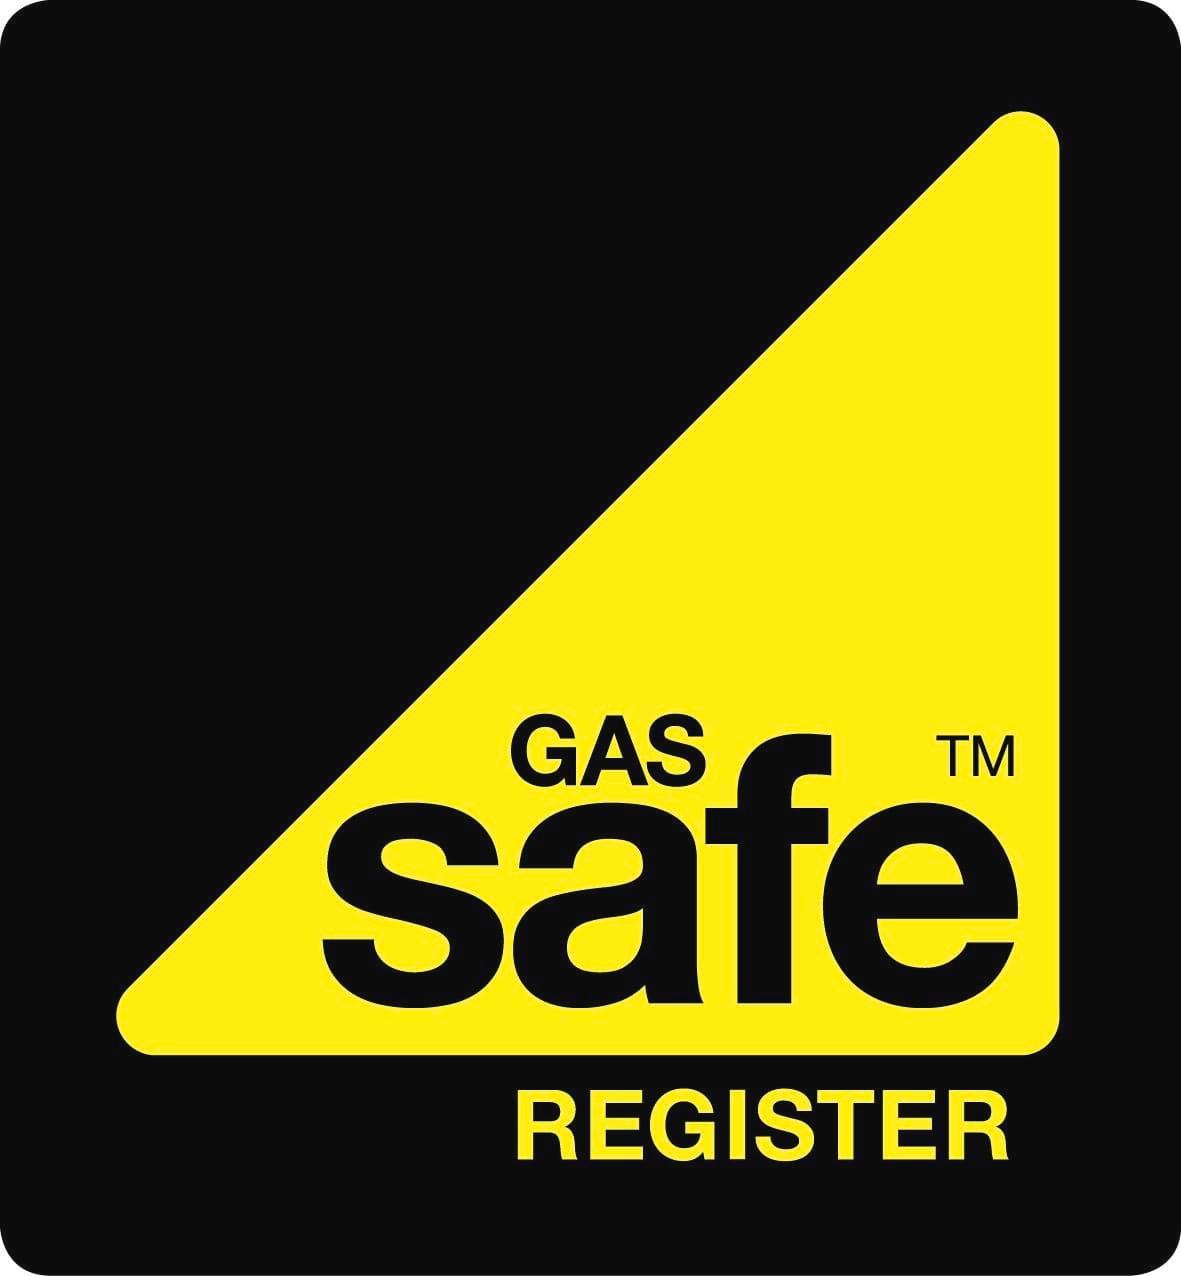 Images Safe Gas Heating & Plumbing Services